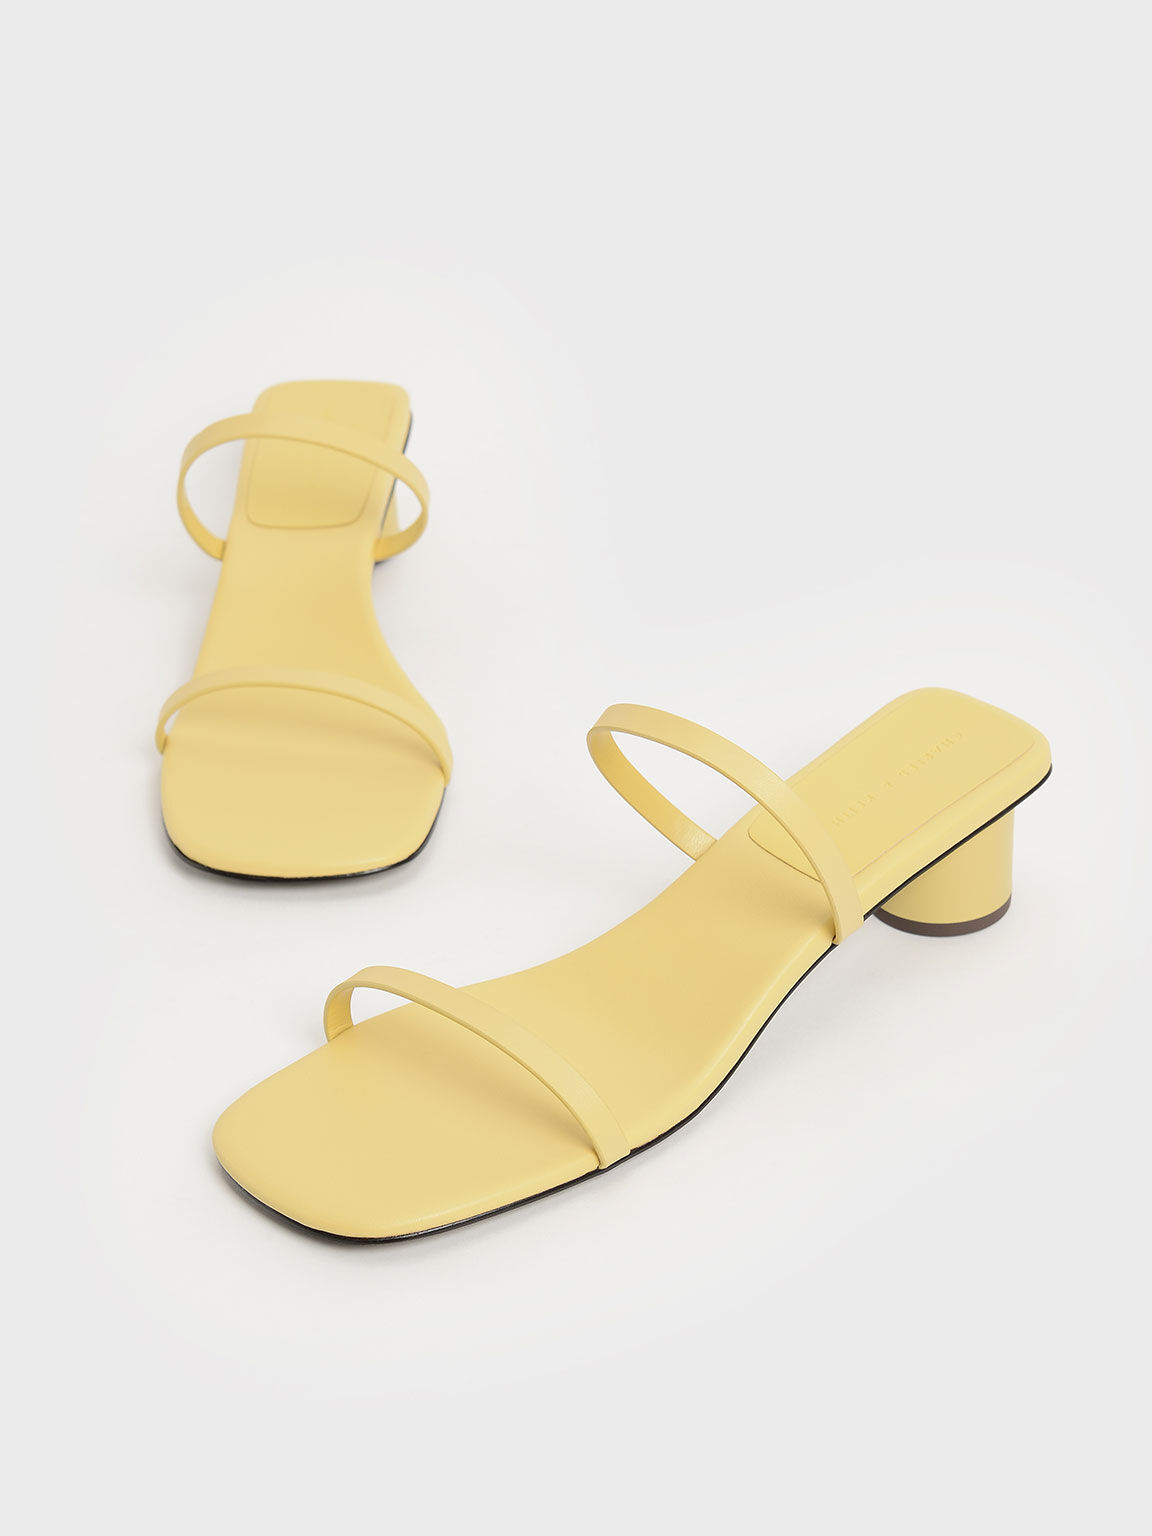 Sandal Double Strap Cylindrical Heel Mules, Yellow, hi-res